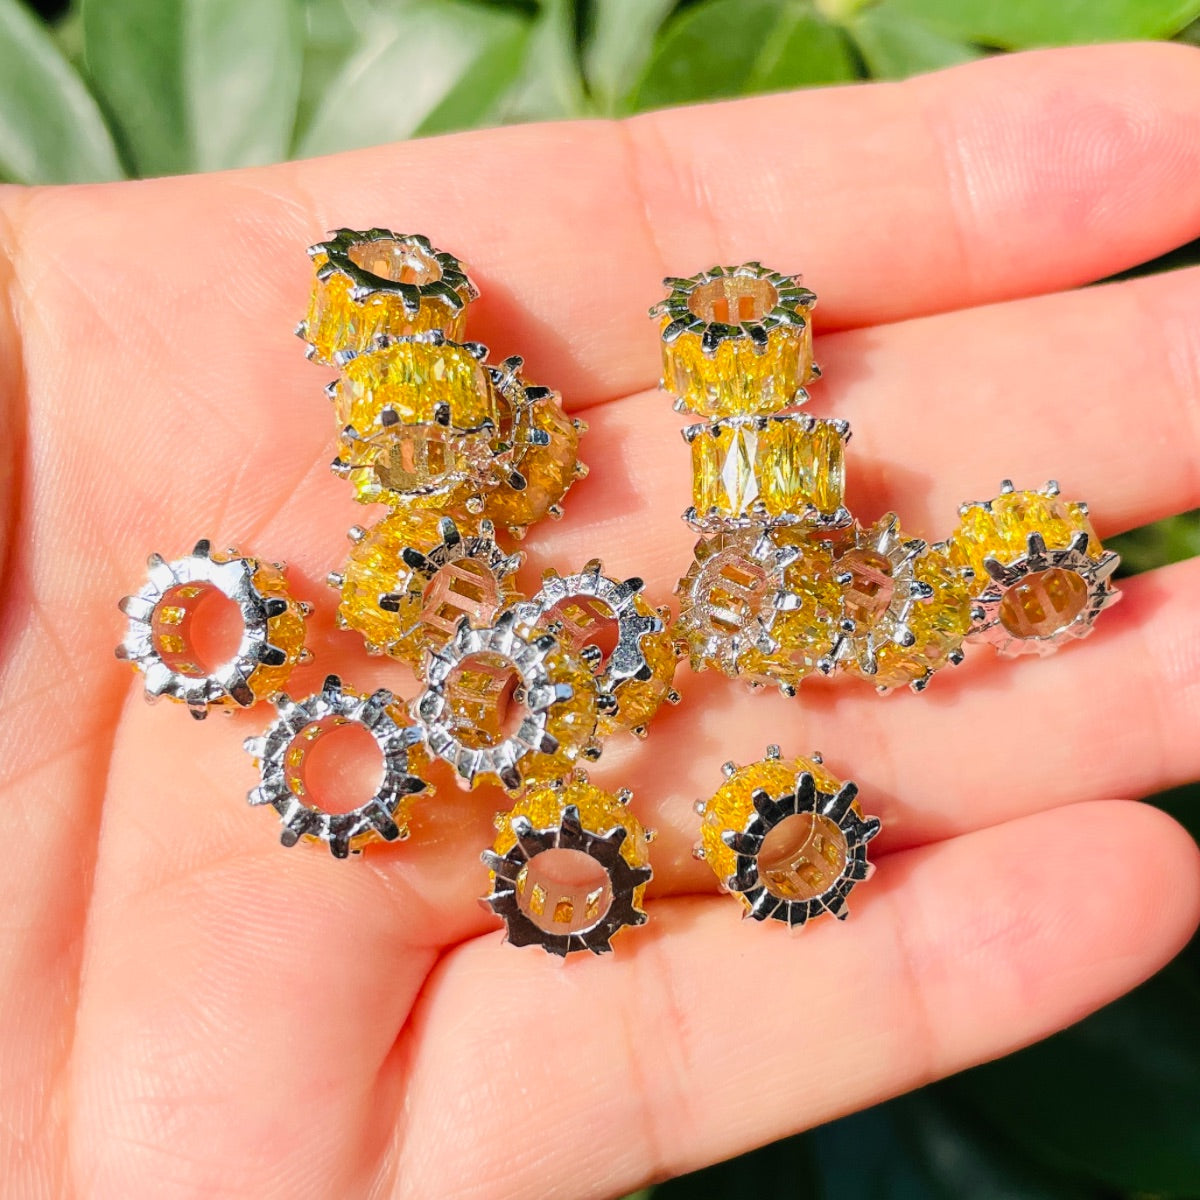 10pcs/lot 9.5*6.4mm Yellow CZ Paved Big Hole Spacers-Silver CZ Paved Spacers Big Hole Beads New Spacers Arrivals Charms Beads Beyond